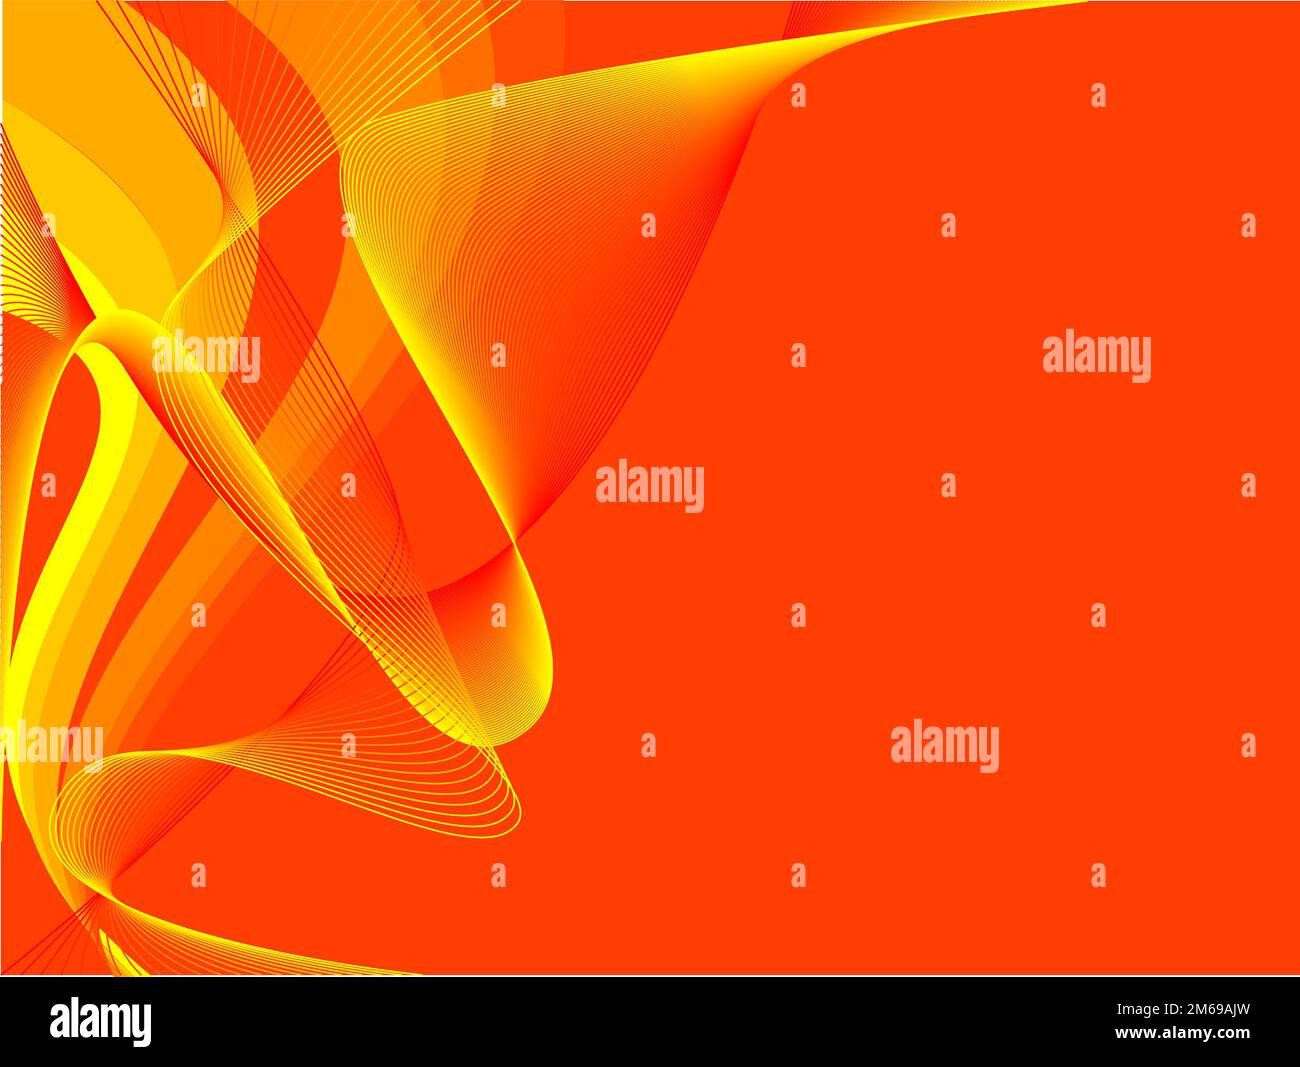 Abstract vector background Stock Photo - Alamy